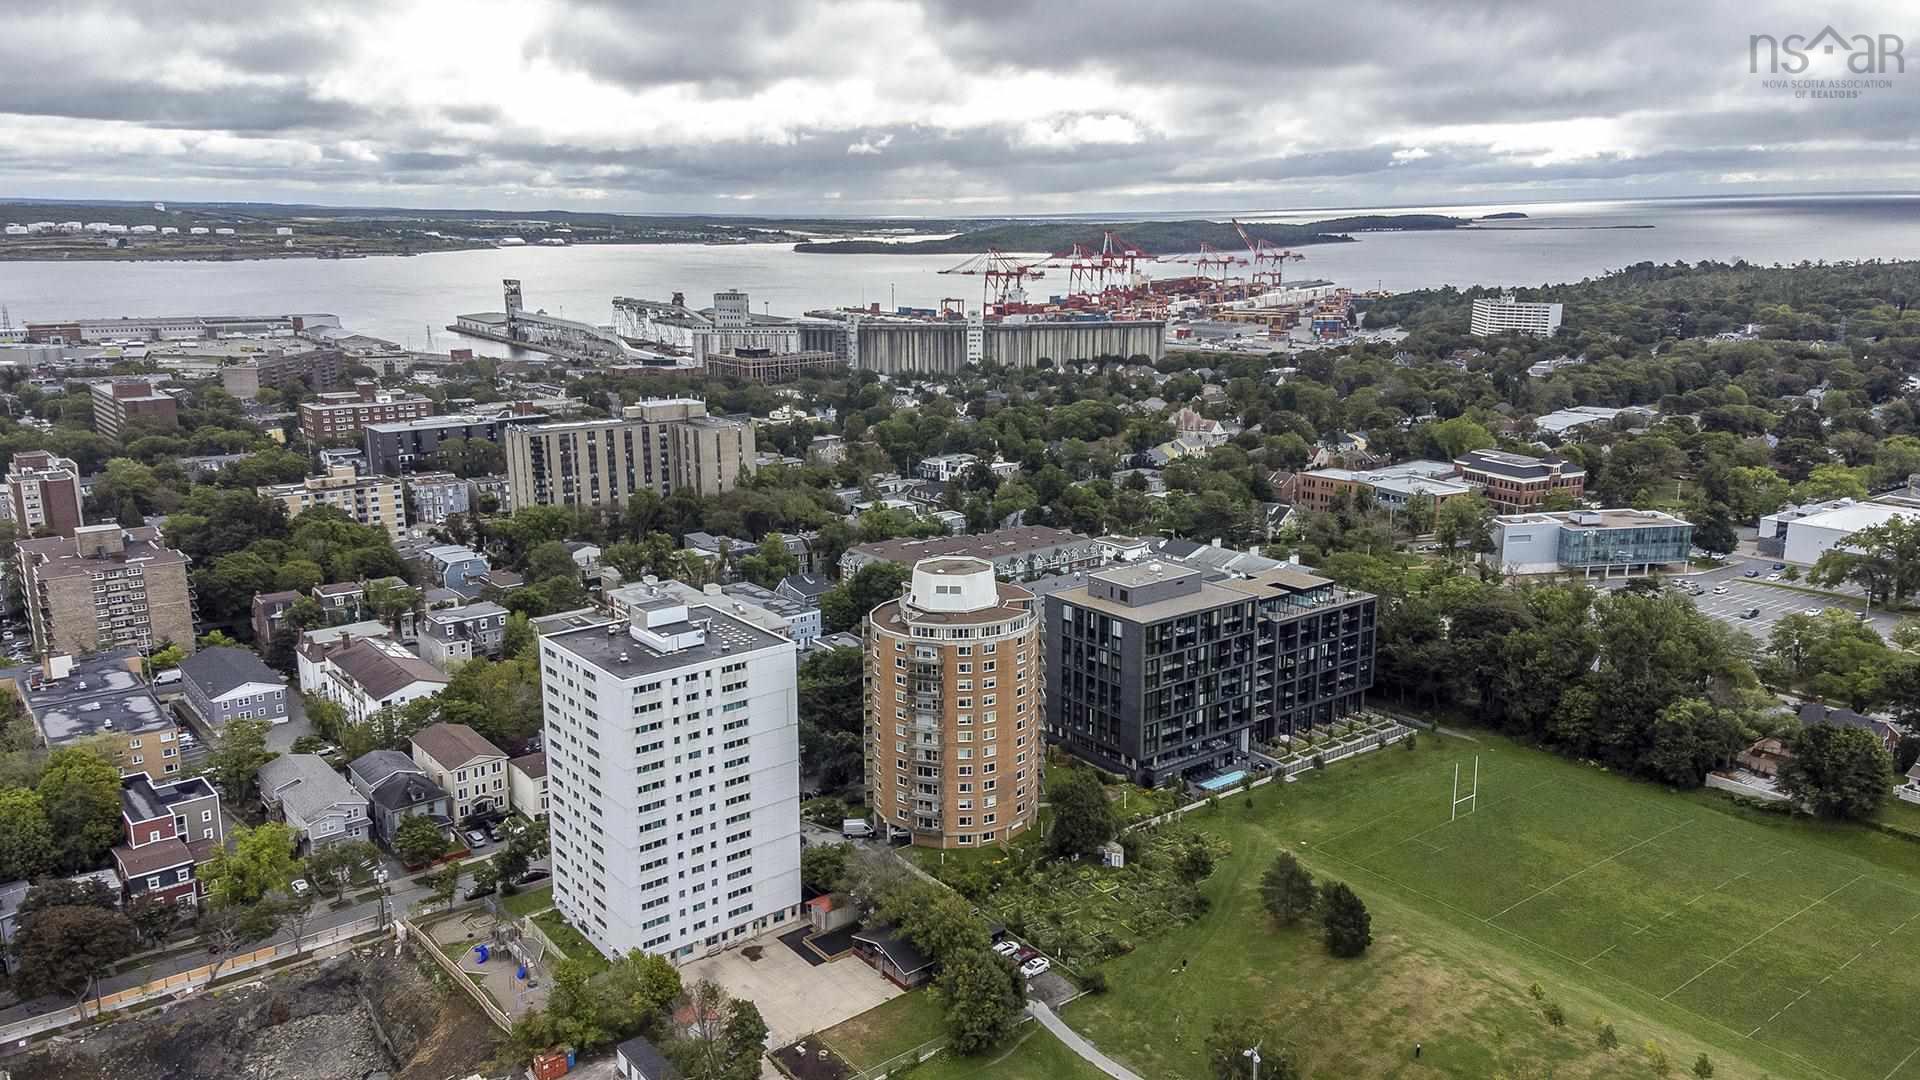 Halifax NS Condos & Apartments For Sale - 51 Listings - Zillow